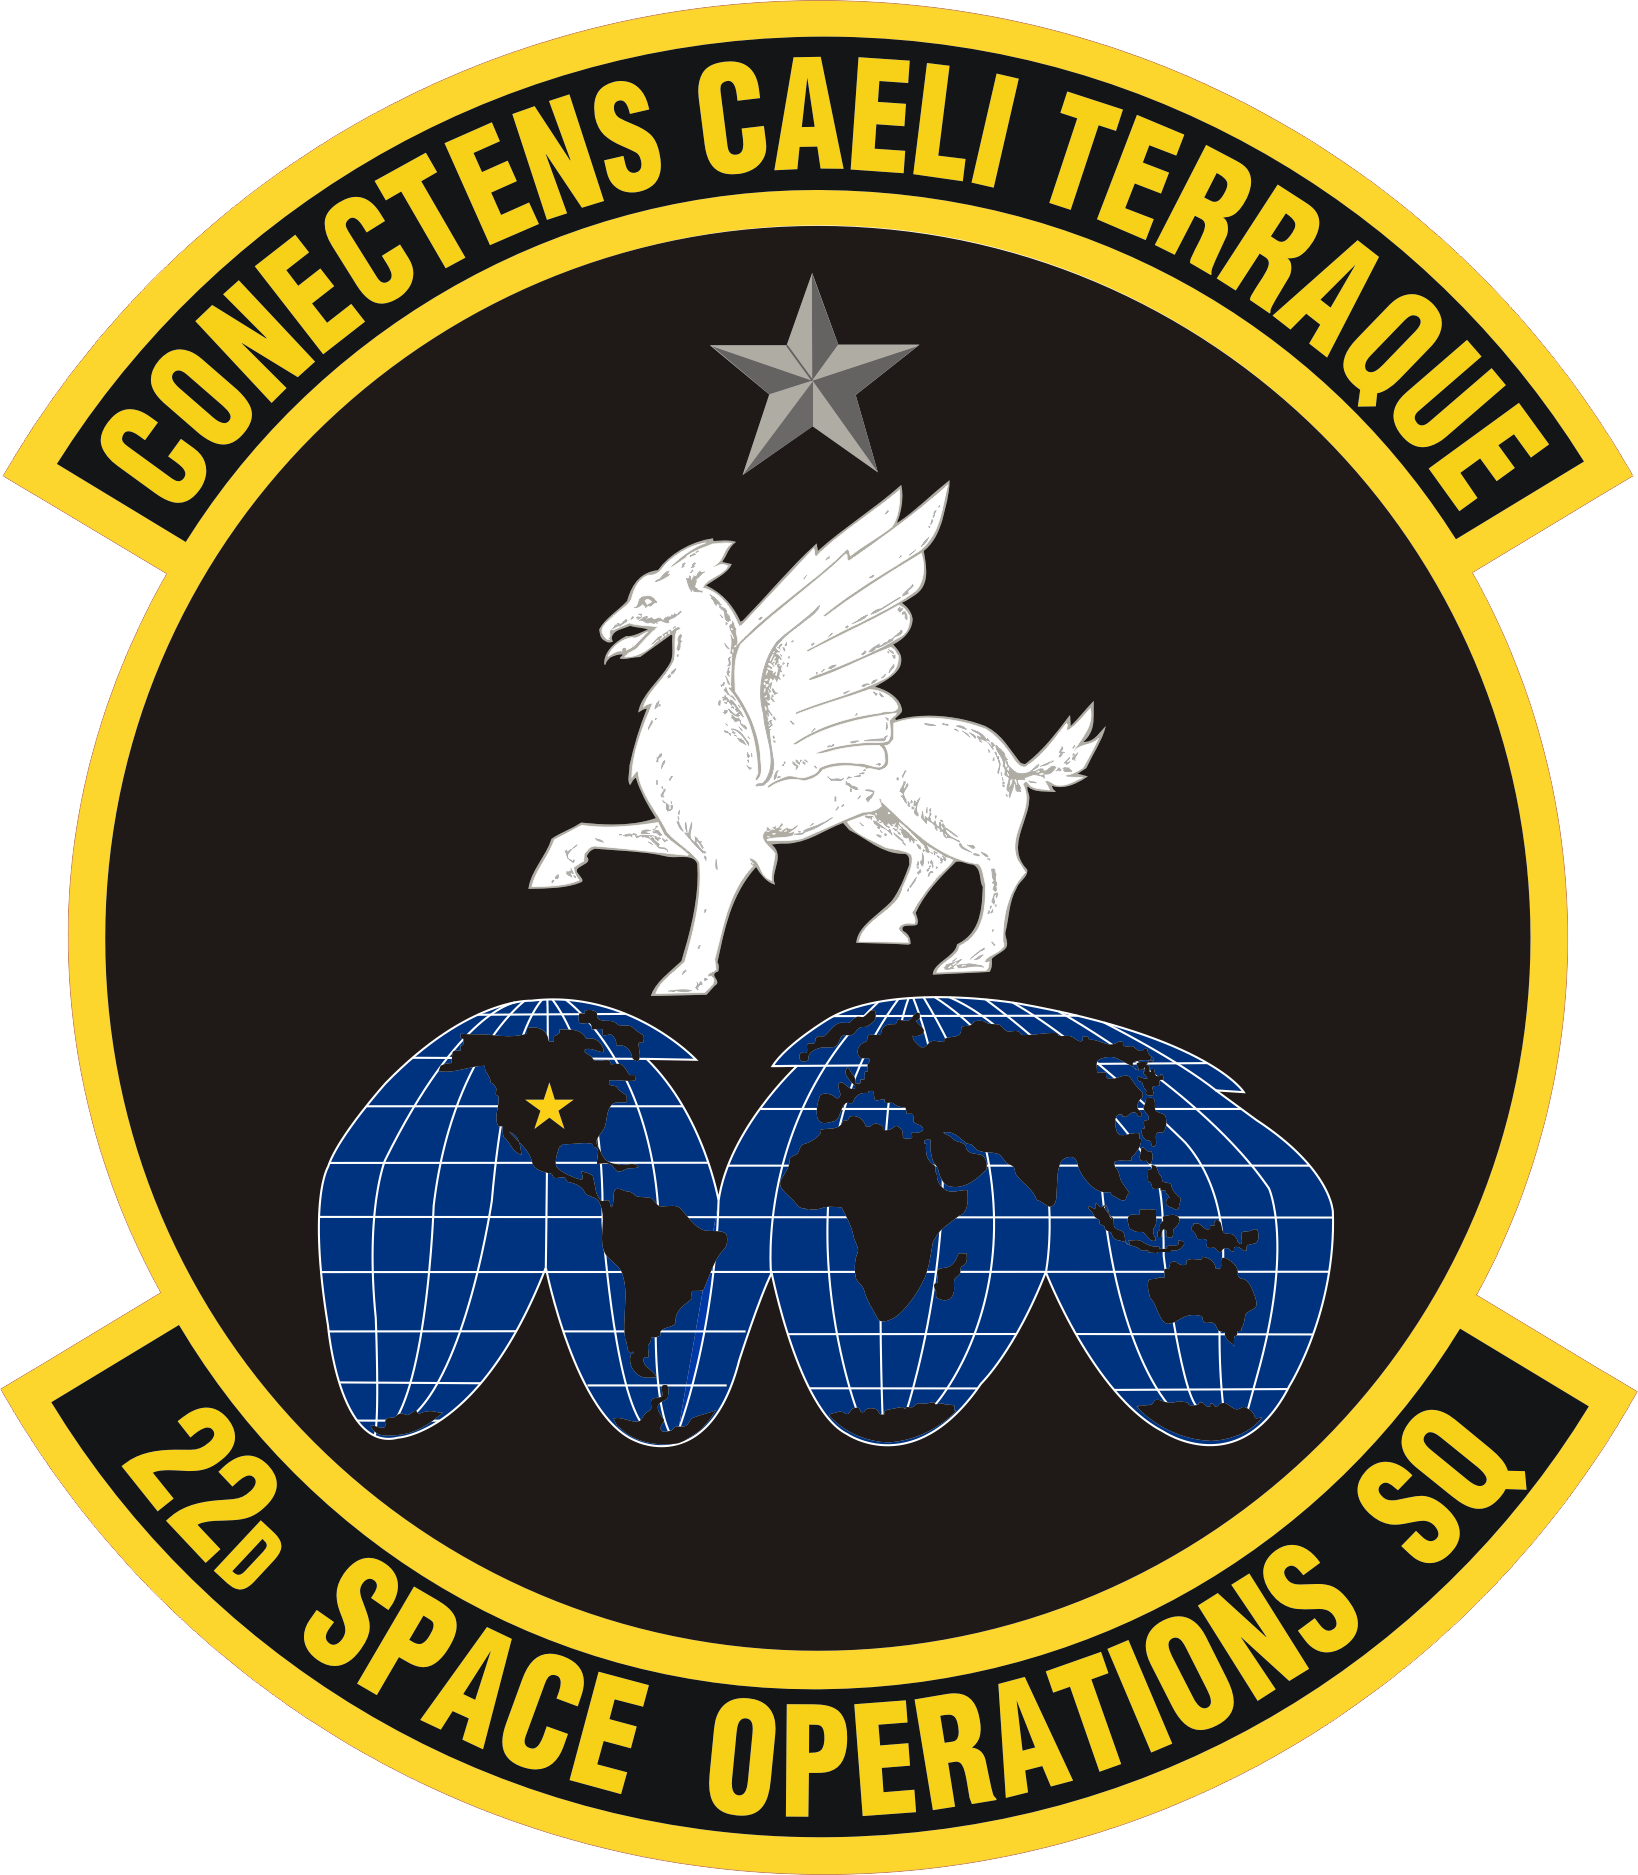 22nd Space Operations Squadron > Schriever Air Force Base > Display1638 x 1875